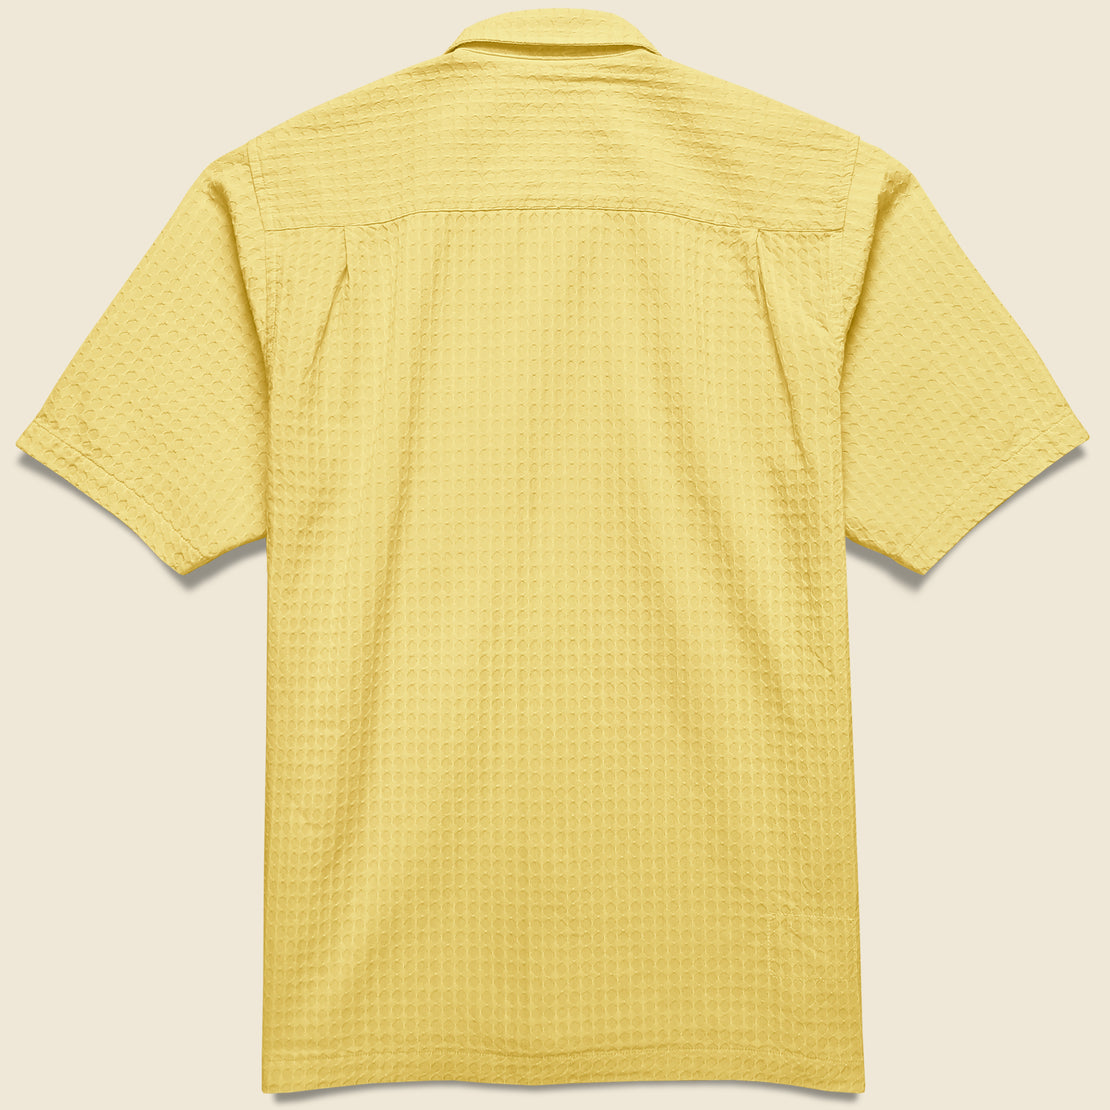 Delos Cotton Camp Shirt - Yellow - Universal Works - STAG Provisions - Tops - S/S Woven - Solid